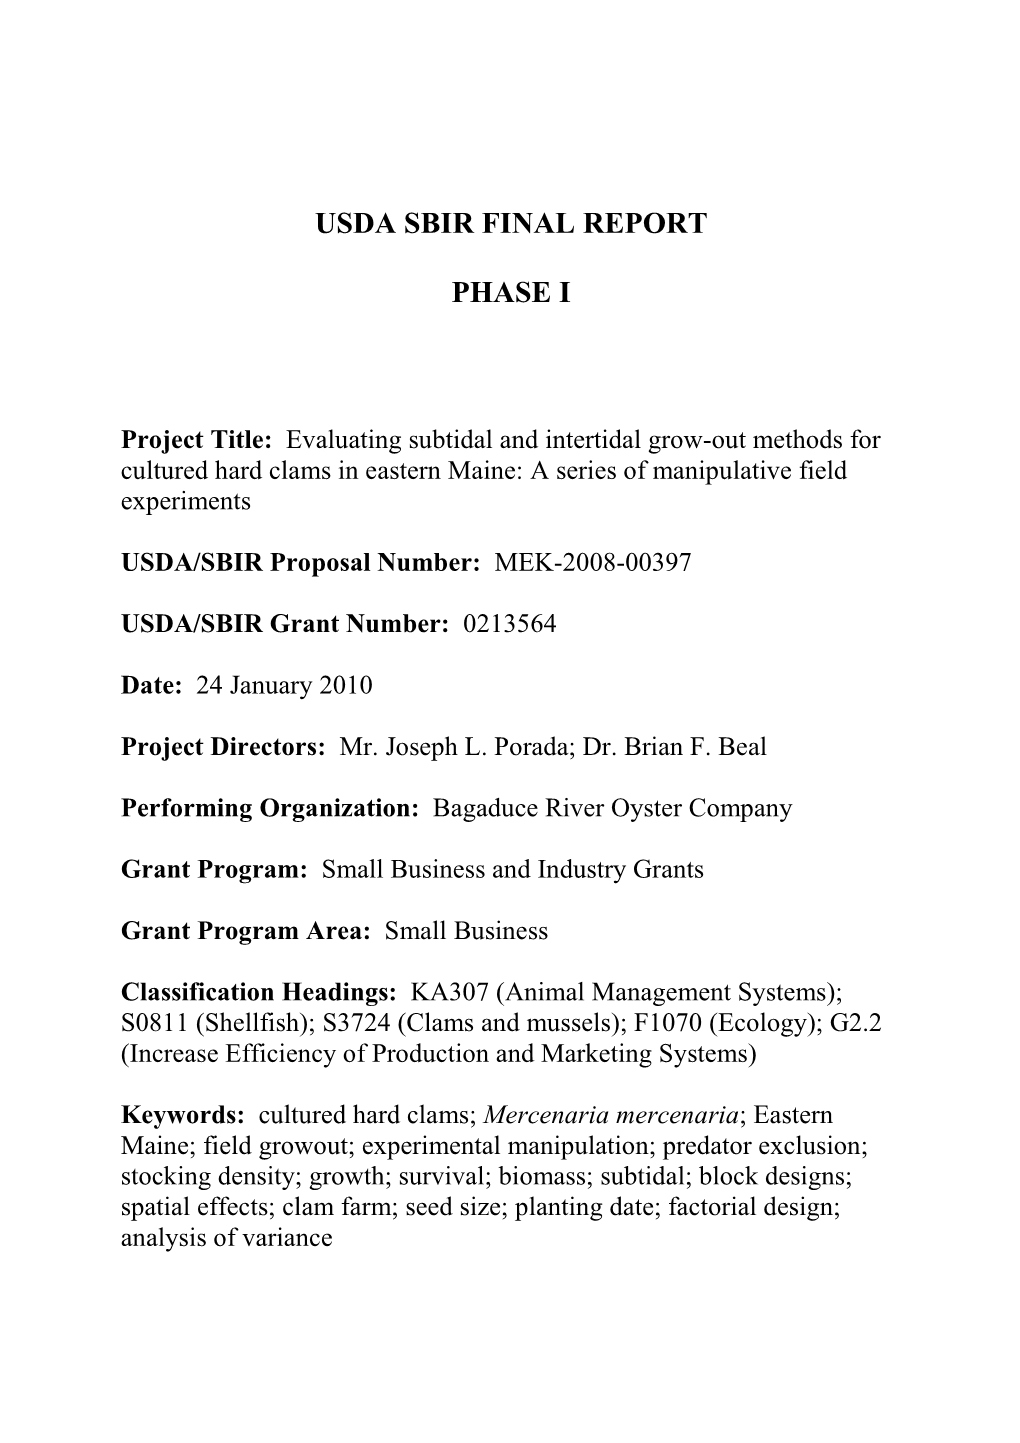 Phase I Final Report USDA SBIR Bagaduce River Oyster Company